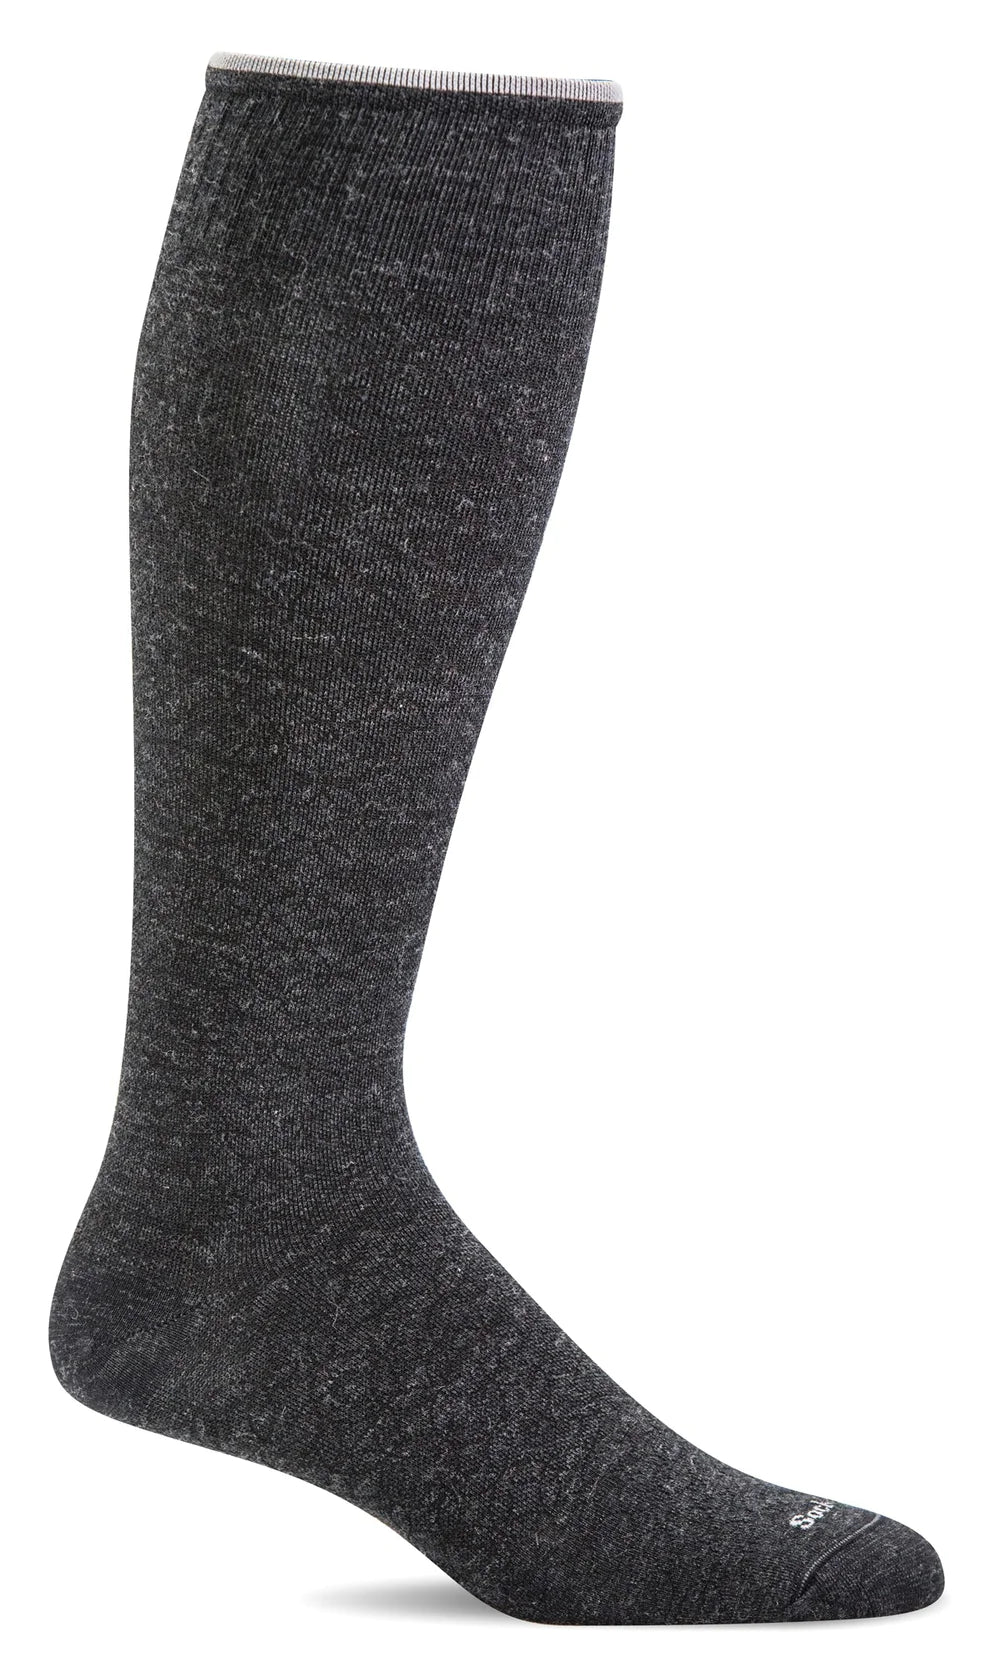 Sockwell - Women's Featherweight Fancy Moderate Graduated Compression Socks - Black